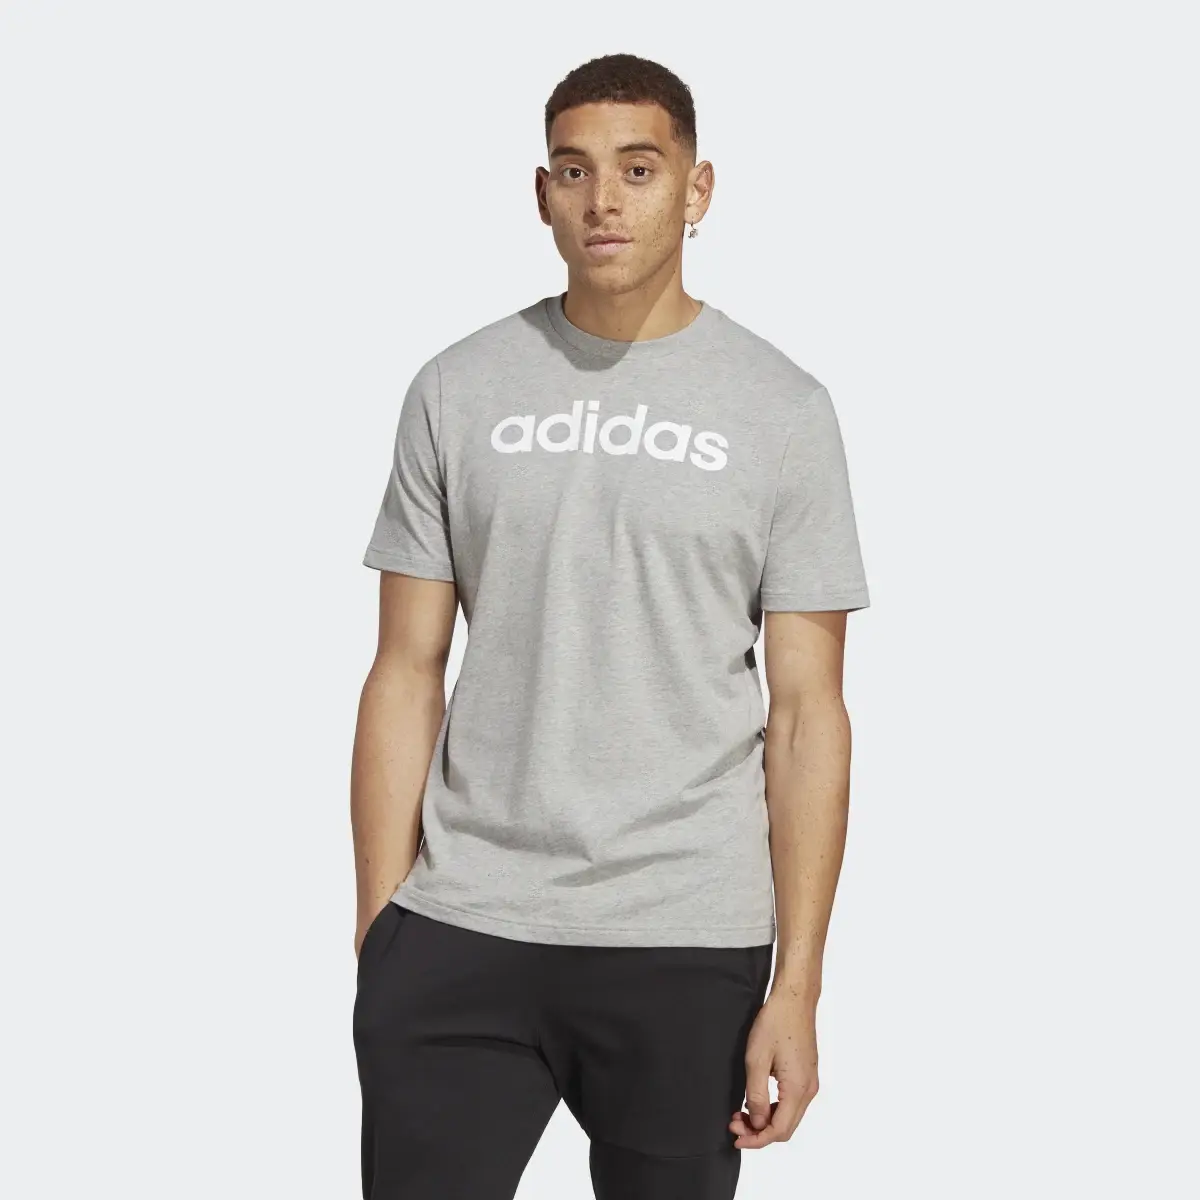 Adidas T-shirt Essentials Single Jersey Linear Embroidered Logo. 2